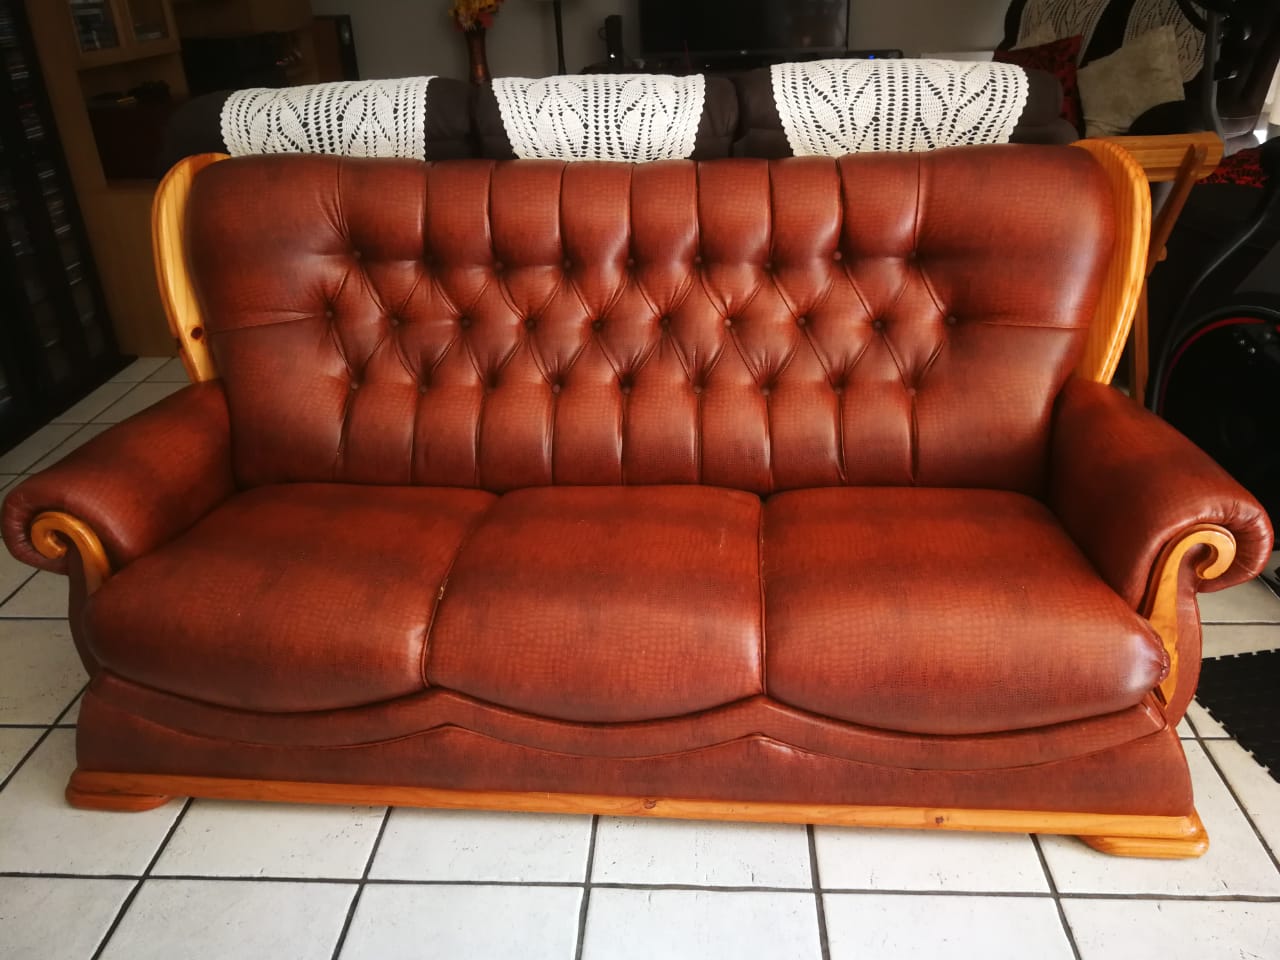 1 x 3 seater, 1 x 2 seater and a single lounge chair for sale in very